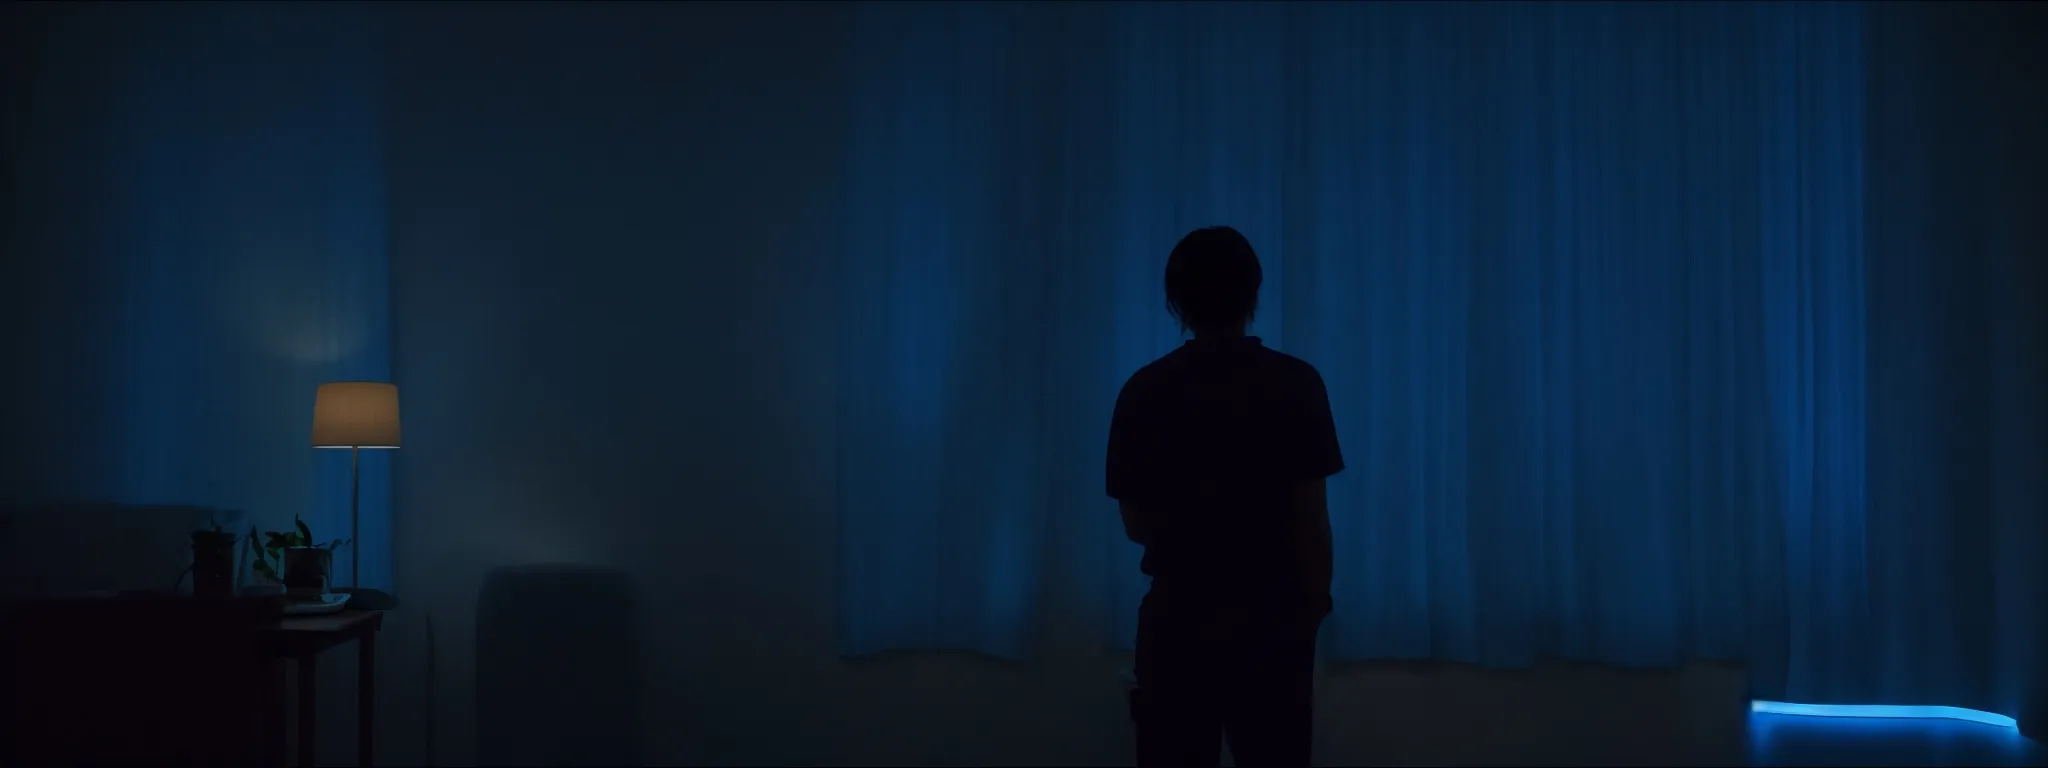 a human silhouette speaking to an amazon echo device that illuminates a room with a soft blue light.